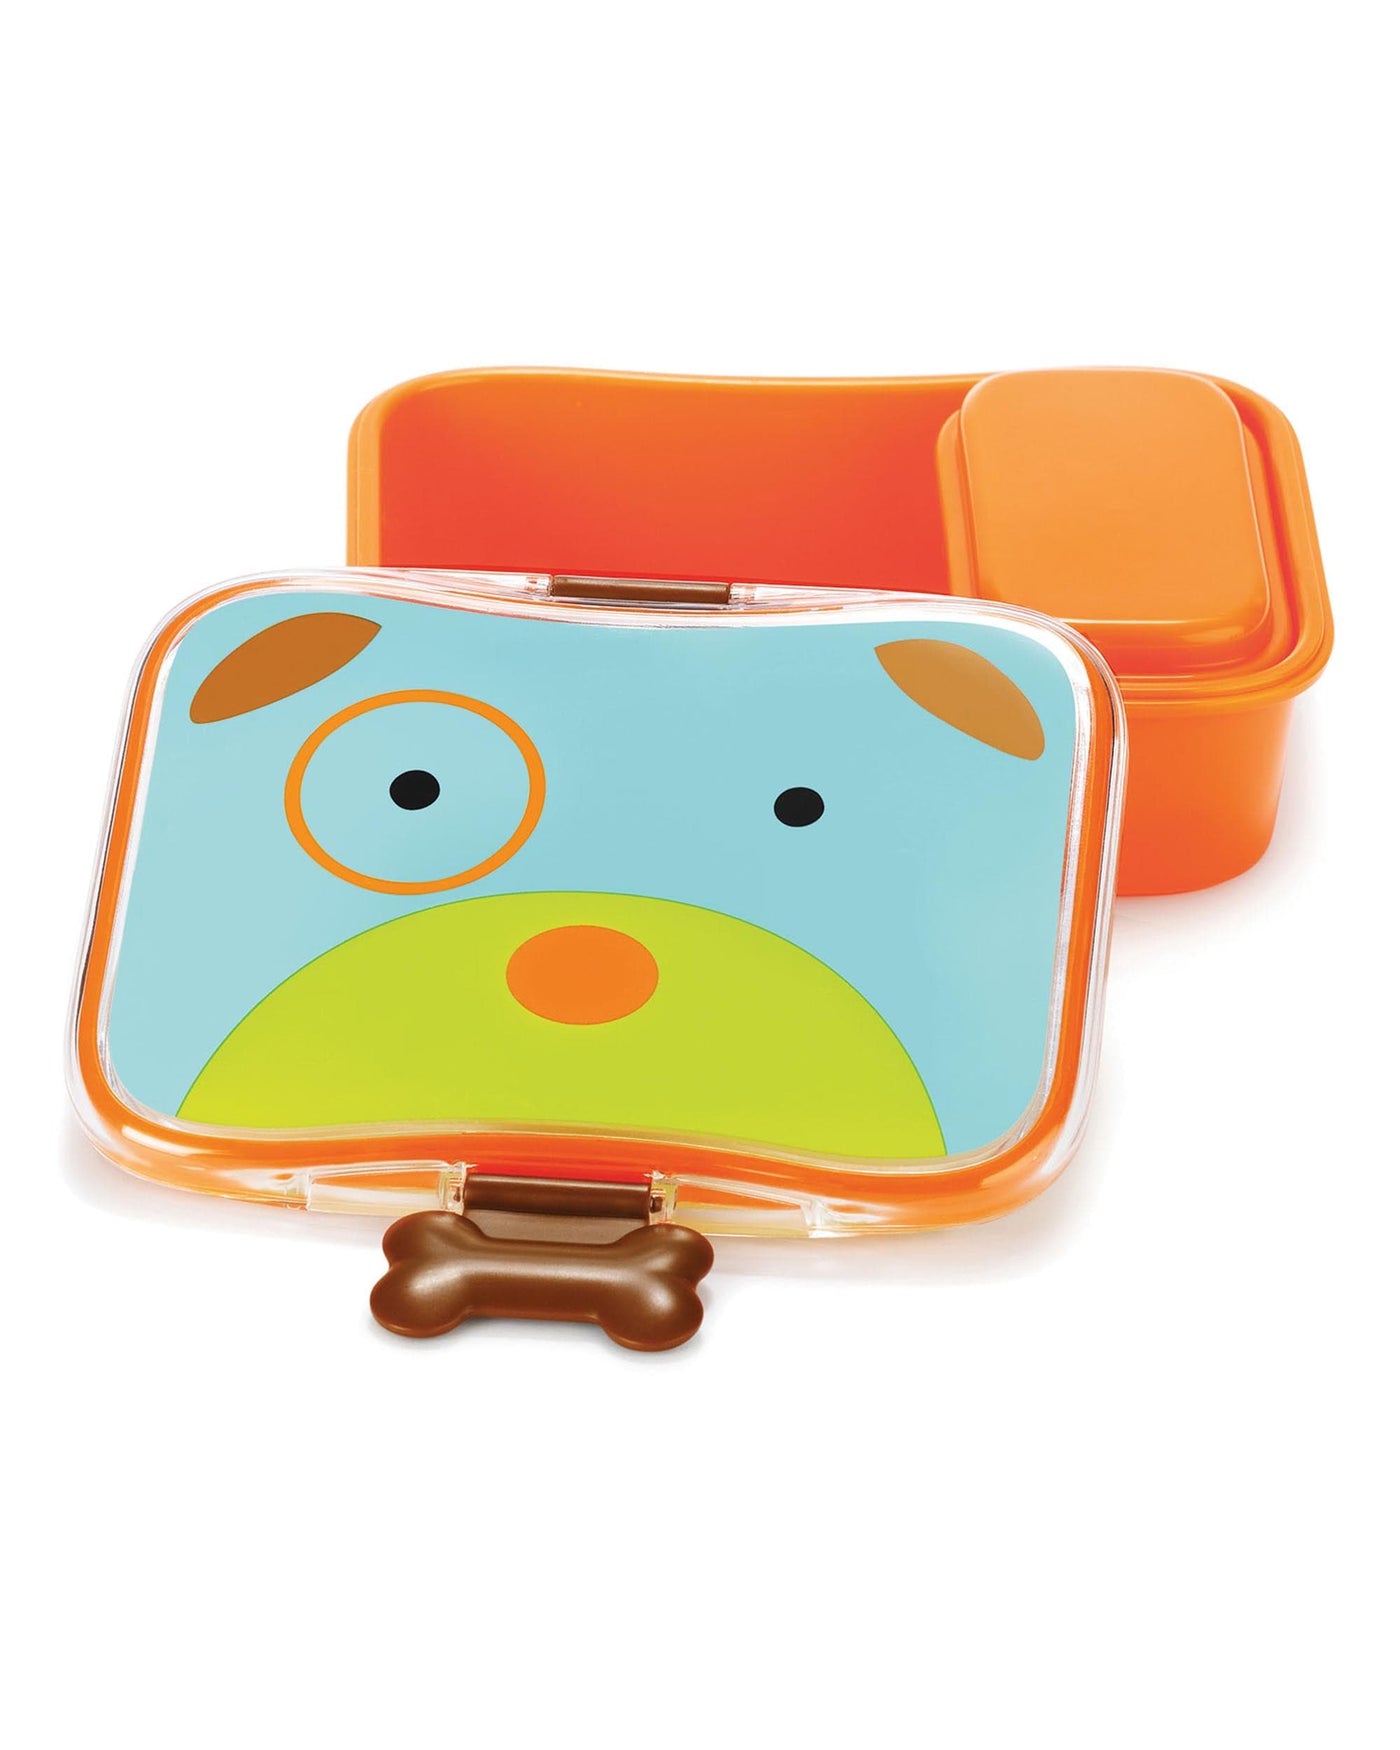 Zoo Lunch Kit - Darby Dog | Skip Hop by Skip Hop, USA Baby Care